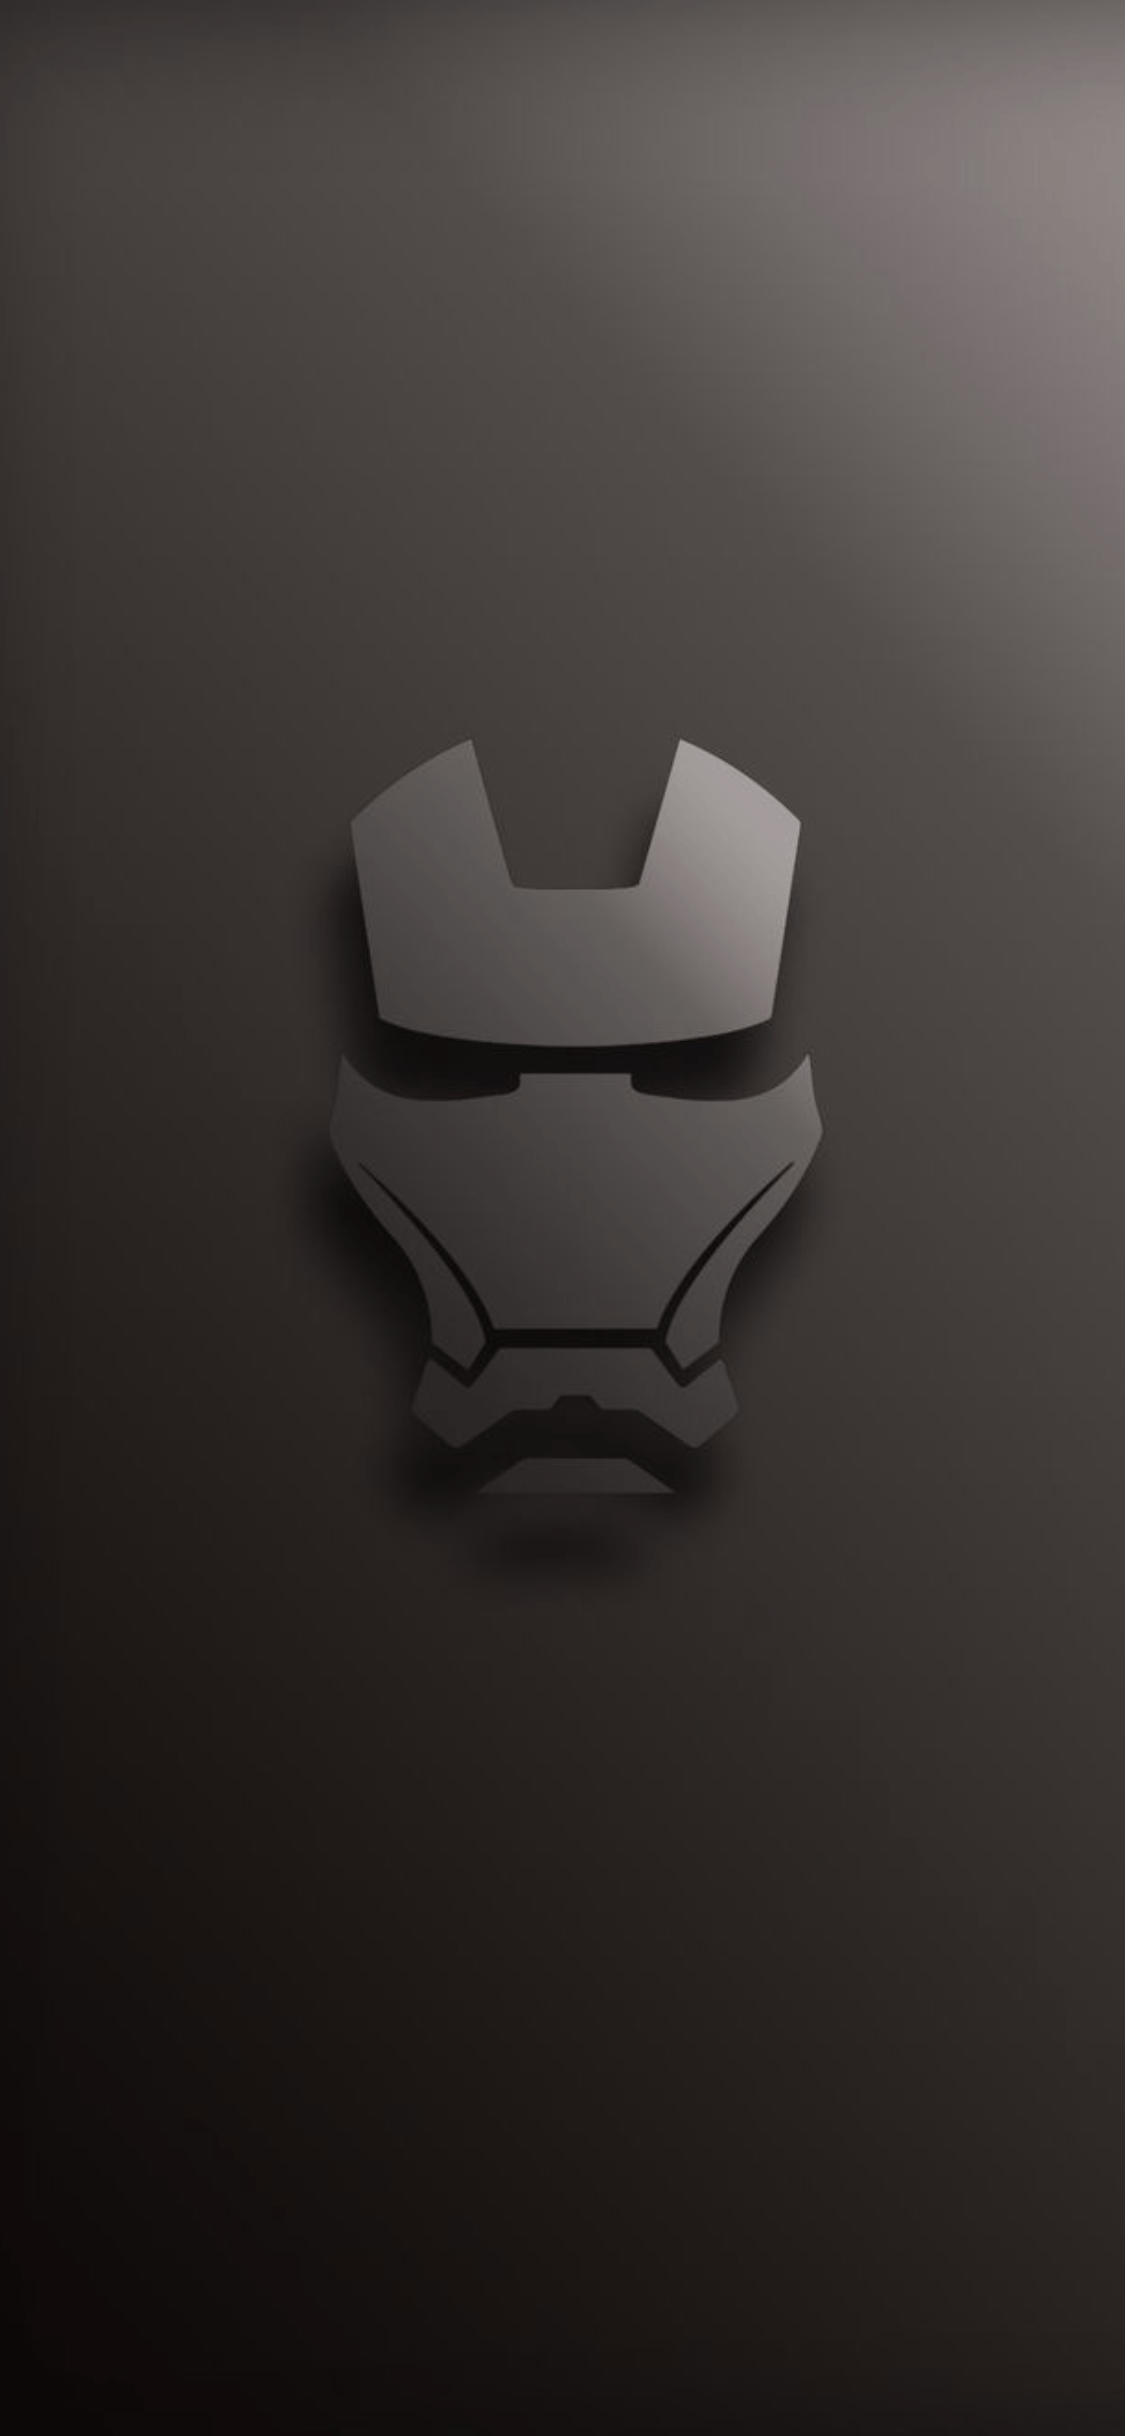 iPhone Marvel Wallpaper HD from Uploaded by user. Iron man